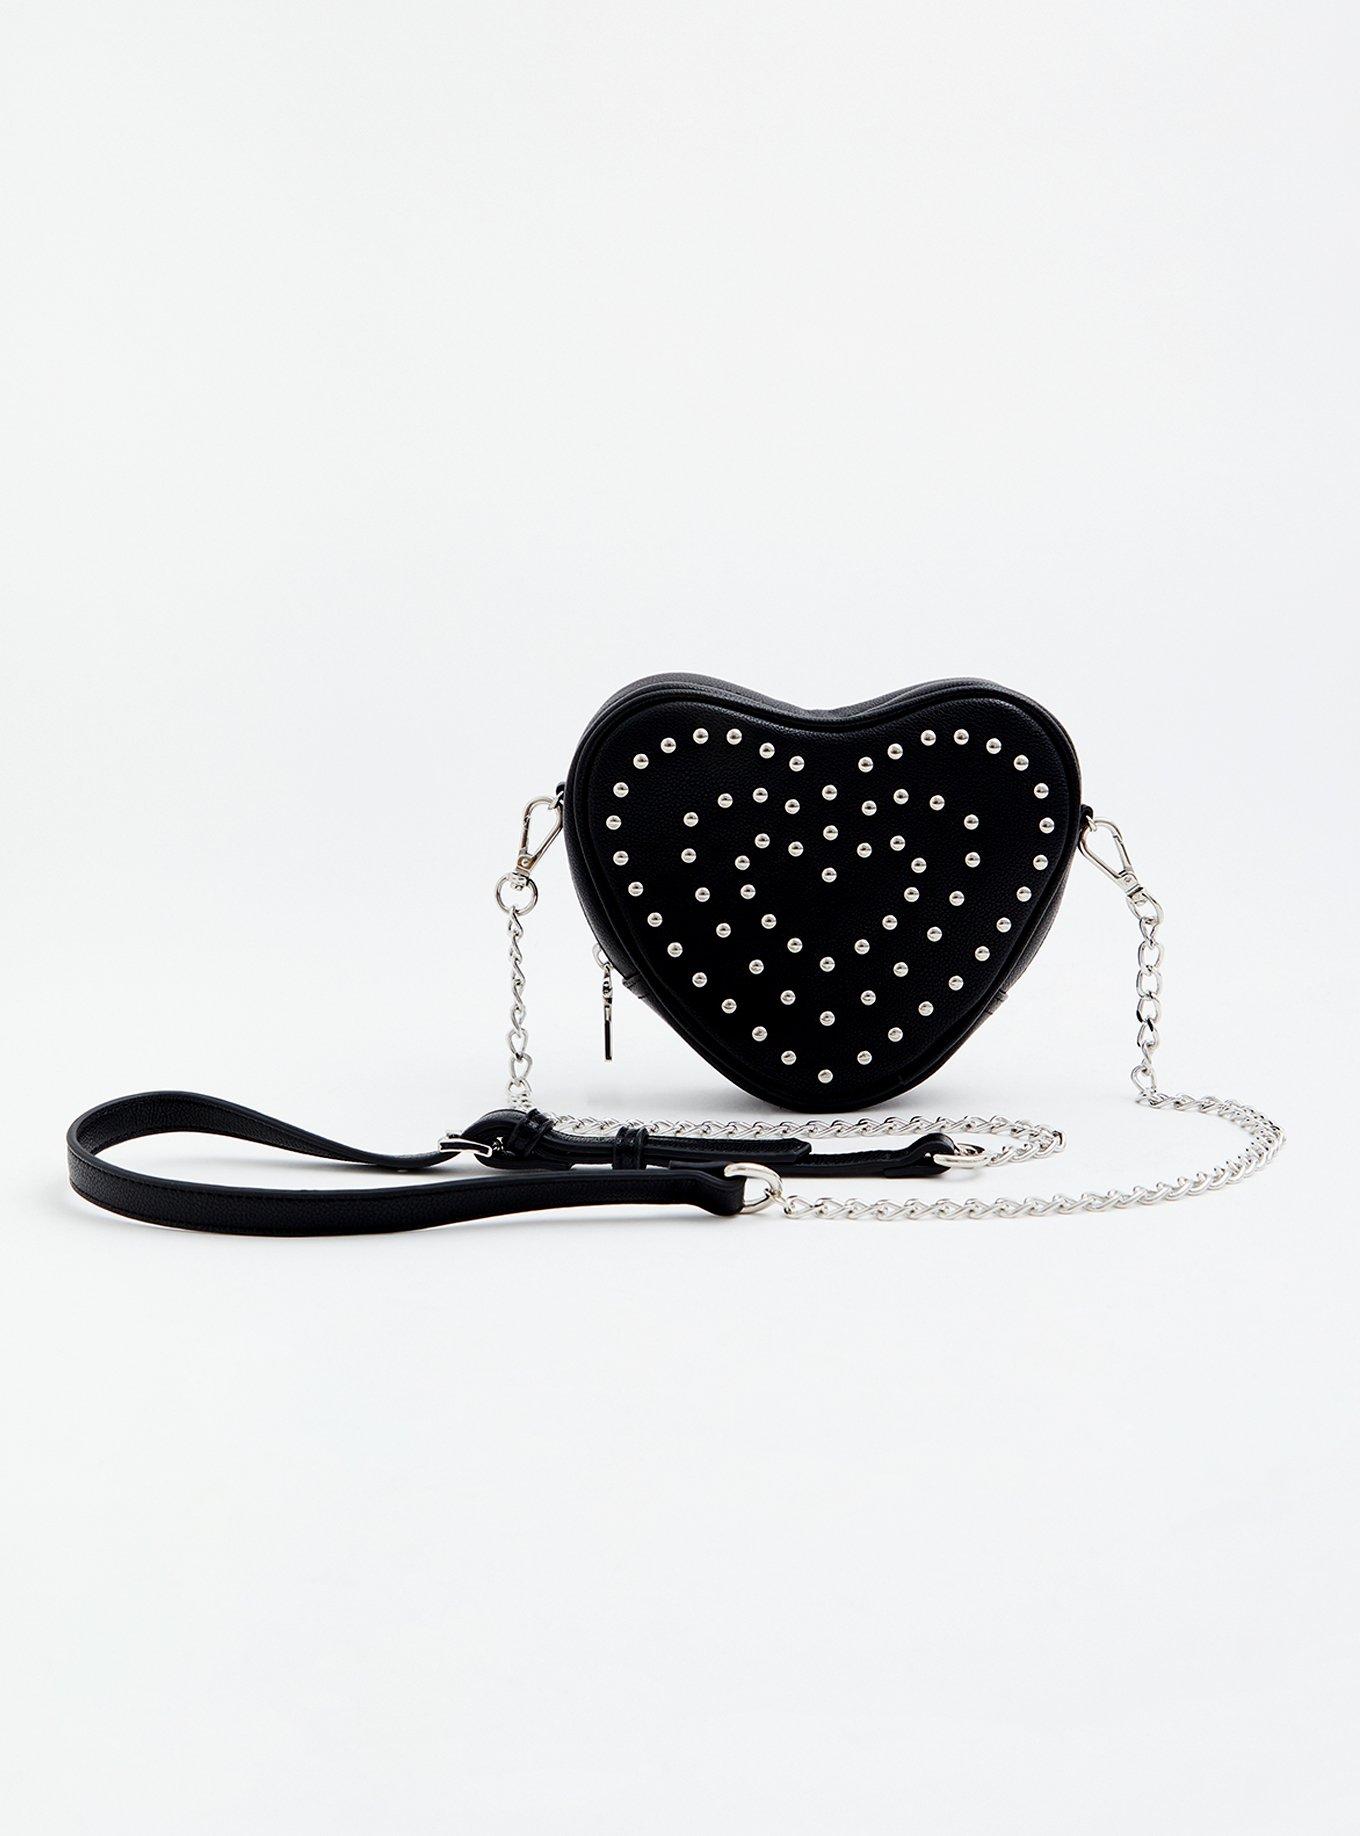 Plus Size - Betsey Johnson Black Faux Leather Studded Heart